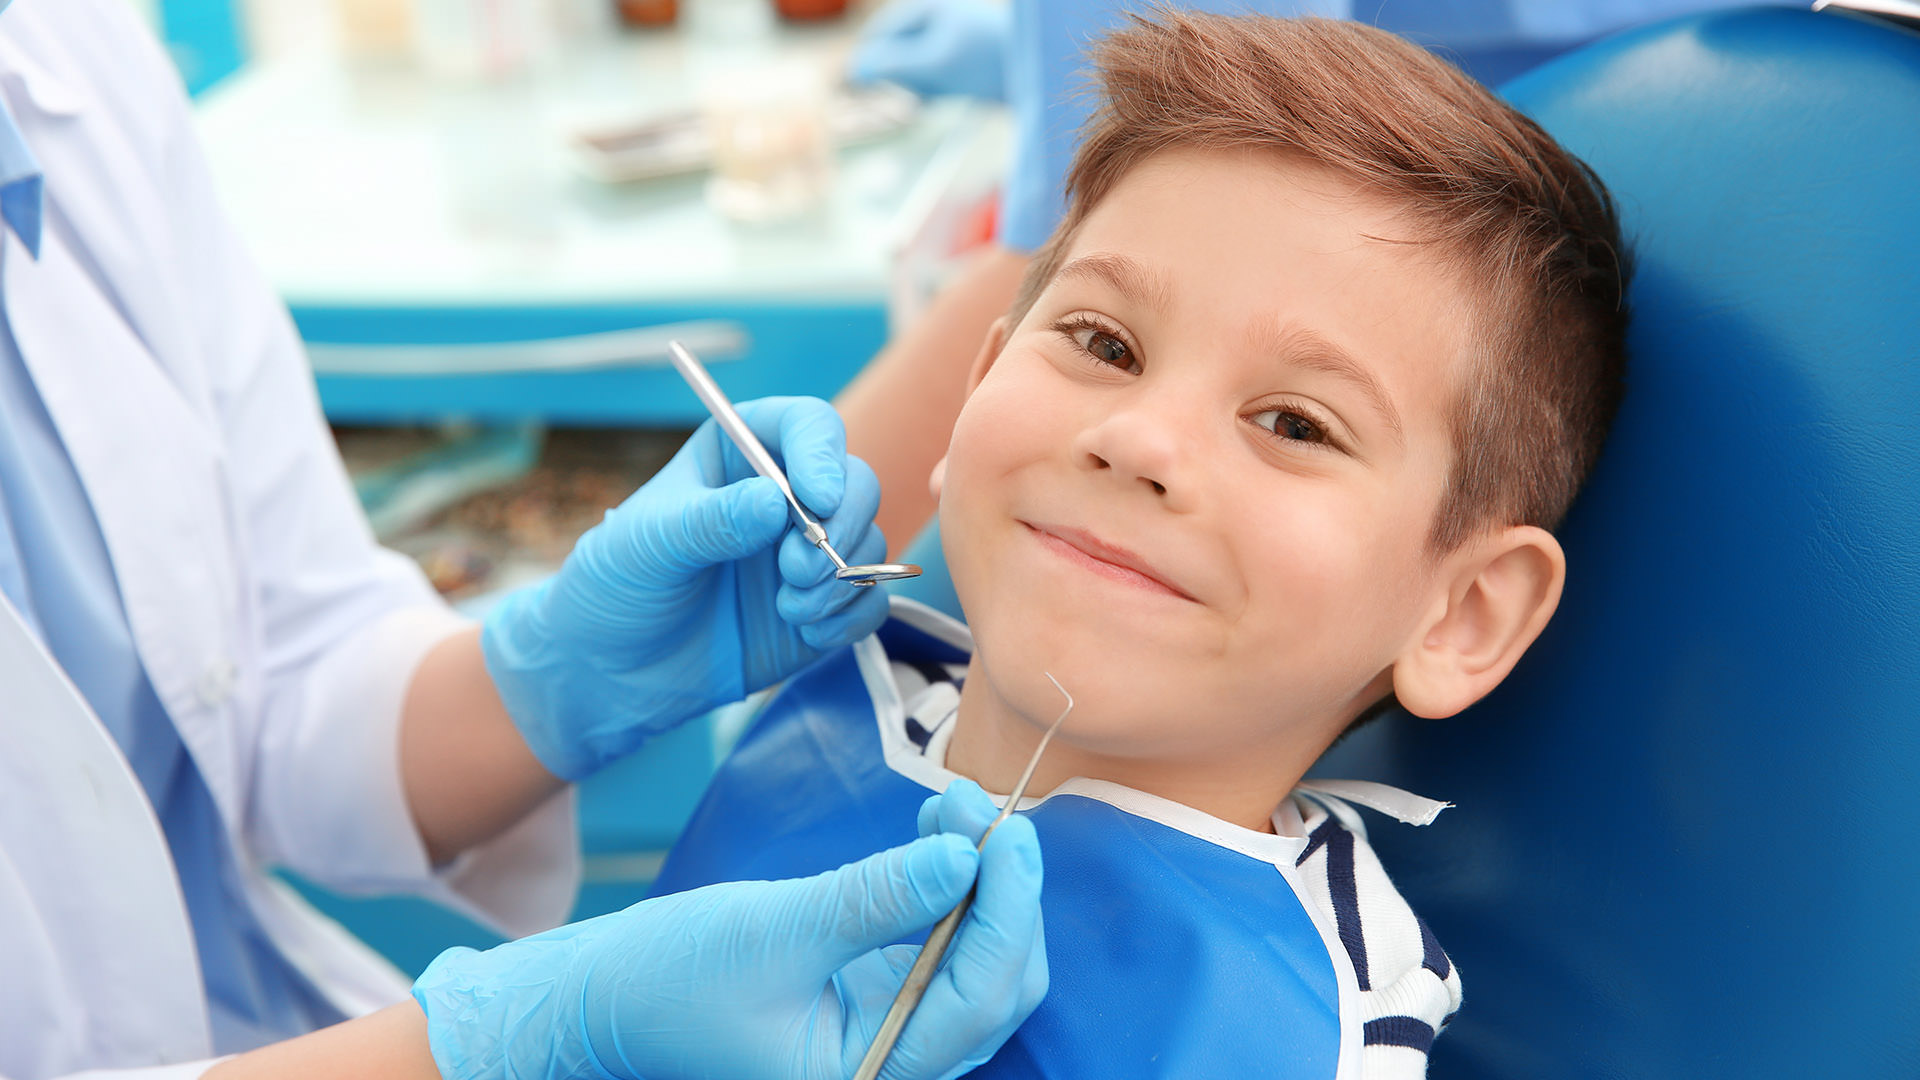 Pediatric dentistry - Kids treatments explained | Butterfly Dental Practice - Dental & Implant Clinic in Oswestry | Shropshire